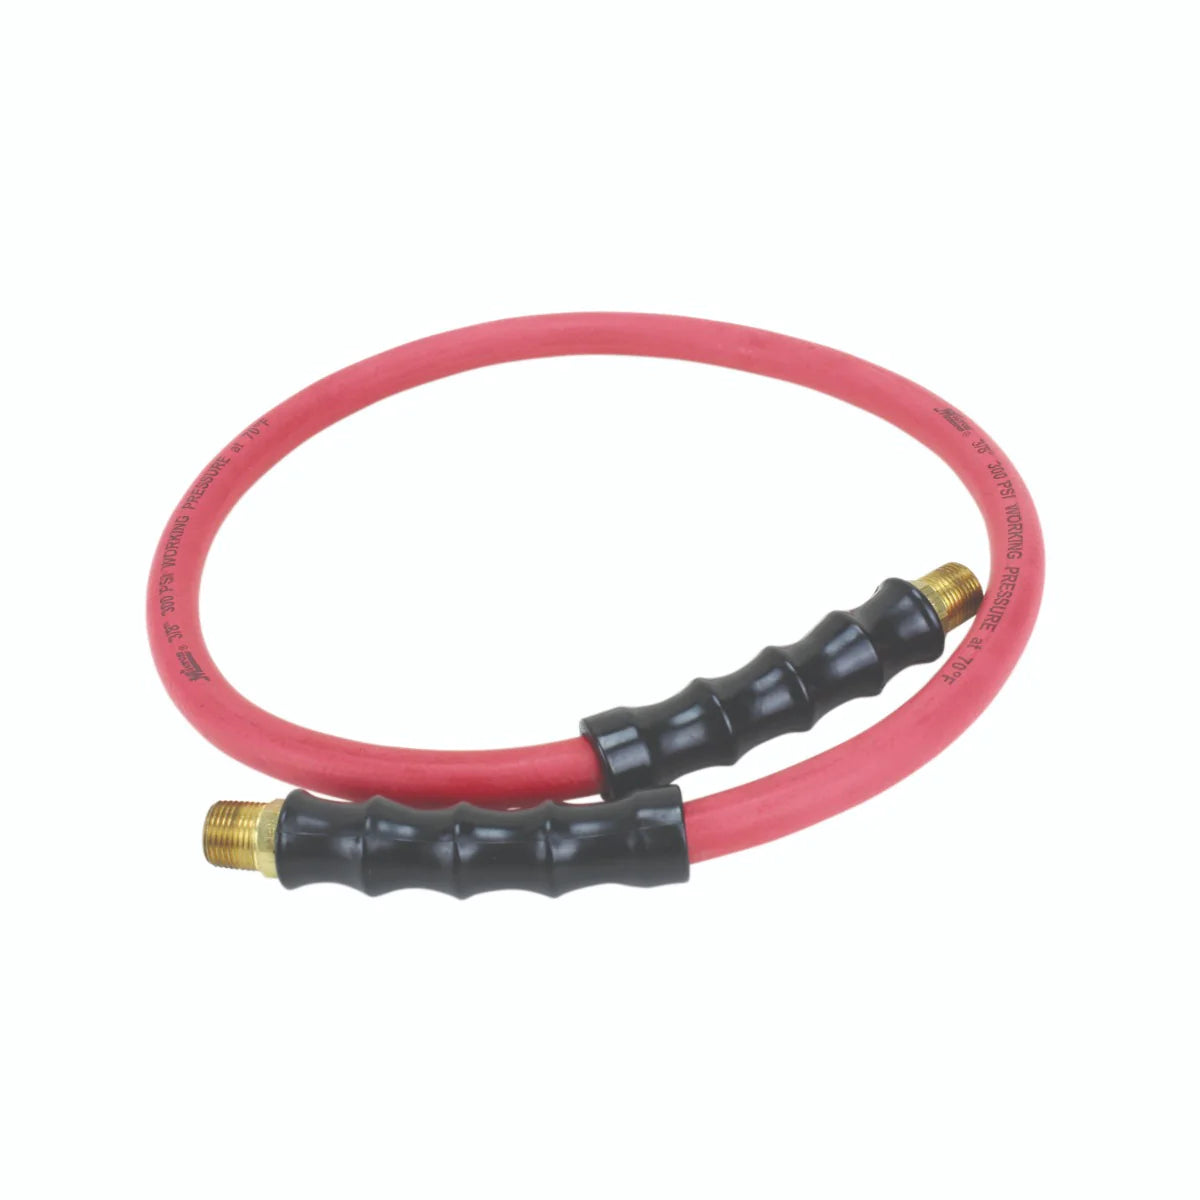 Milton 3 ft. L x 3/8 in. 300 PSI ID Hybrid EPDM Lead-In Air Hose (3/8 in. NPT Brass Fittings) 2770-3LH